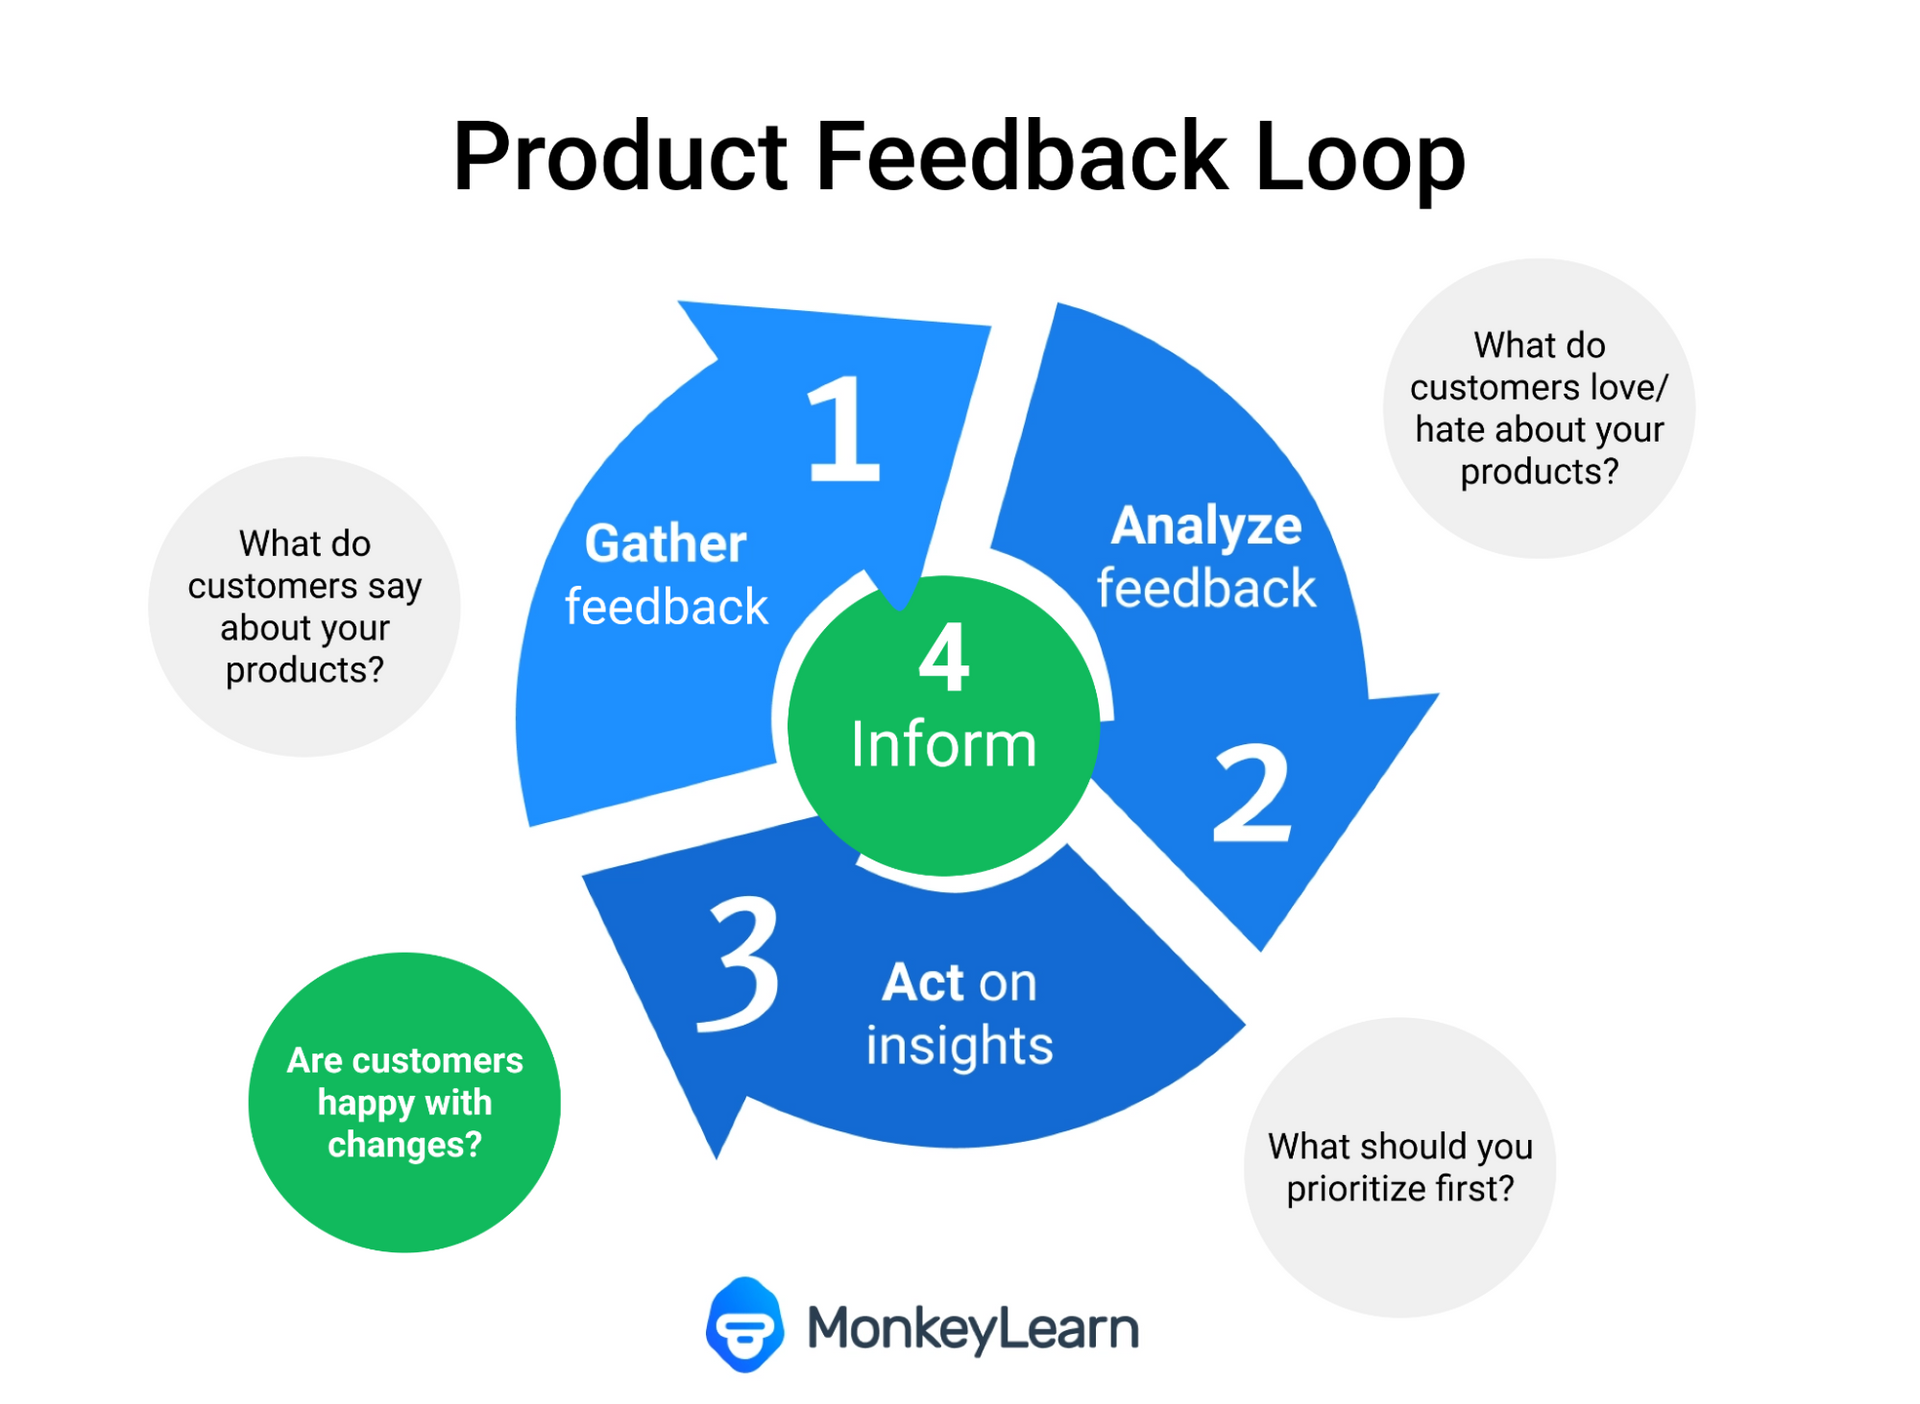 A product feedback loop: collect feedback, analyze feedback, act upon feedback, and inform customers about product changes.